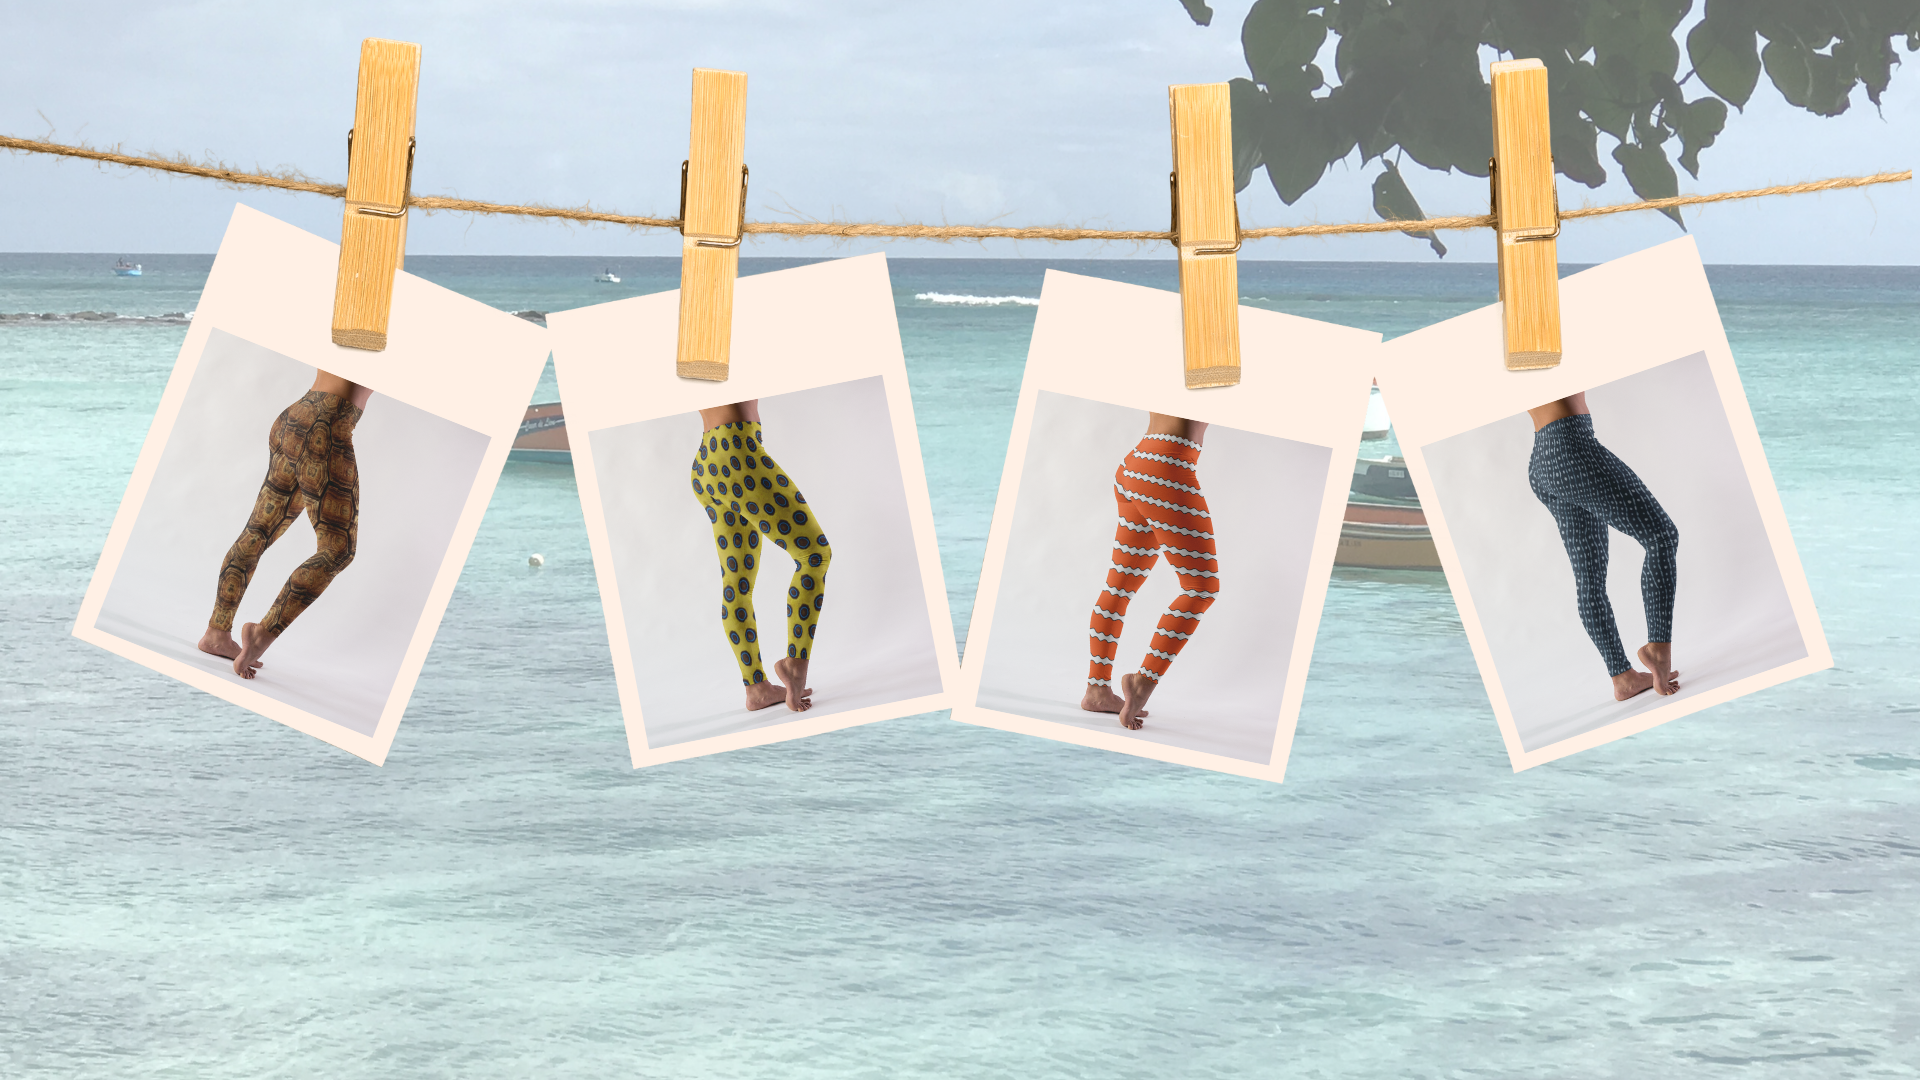 Four Polaroid photos each with a different set of leggings, pinned to a clothesline overlooking the ocean